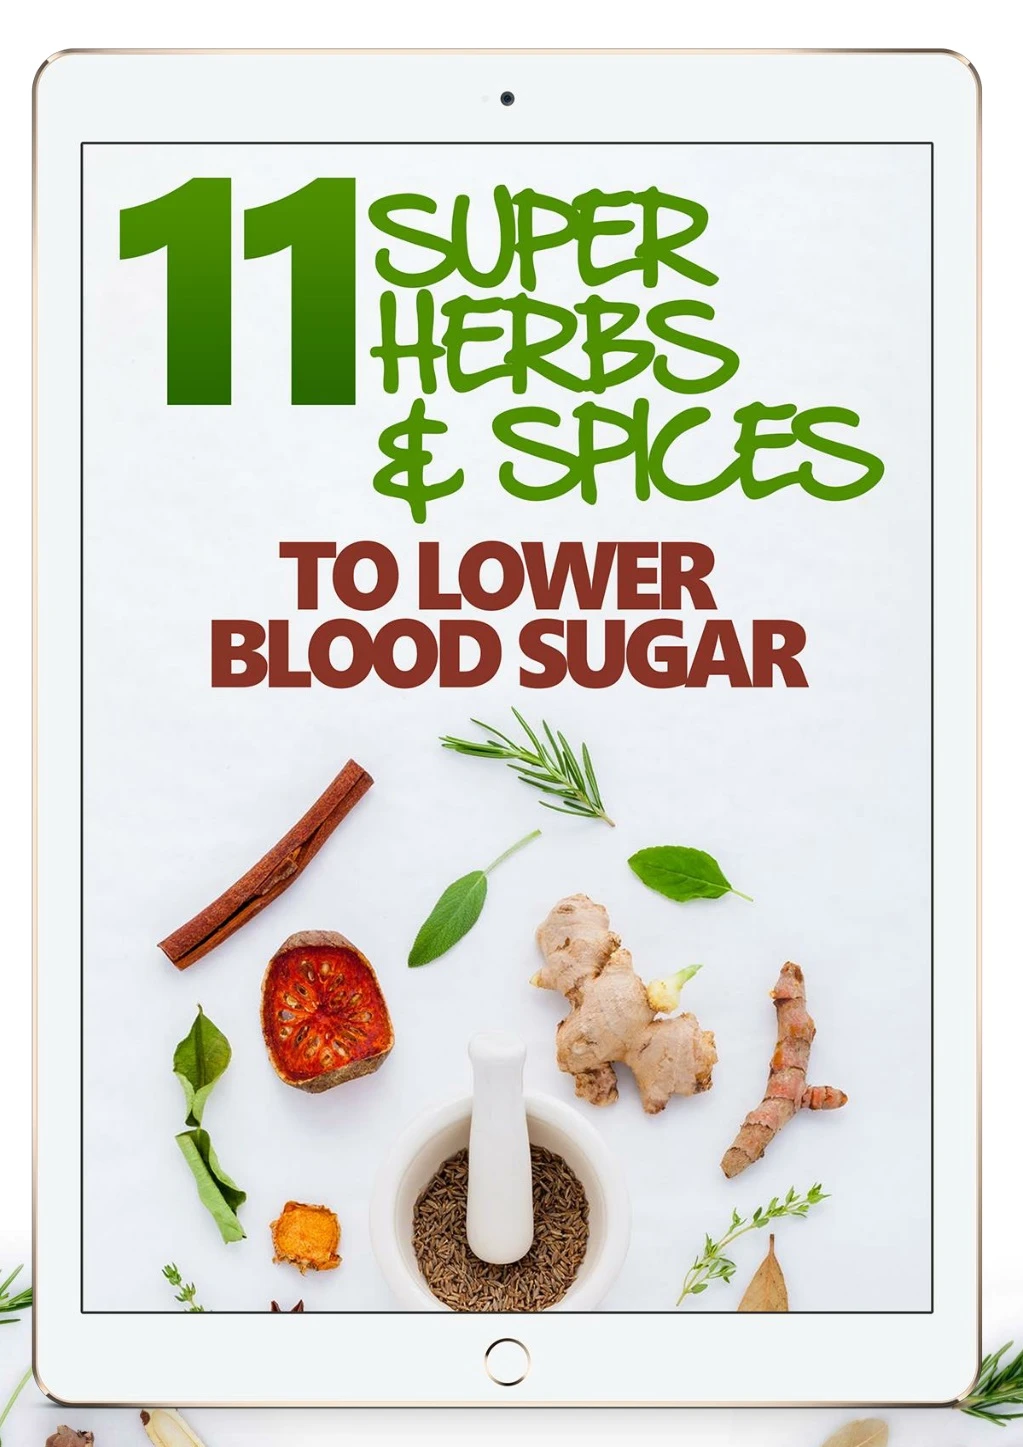 11 super herbs and spices that lower blood sugar